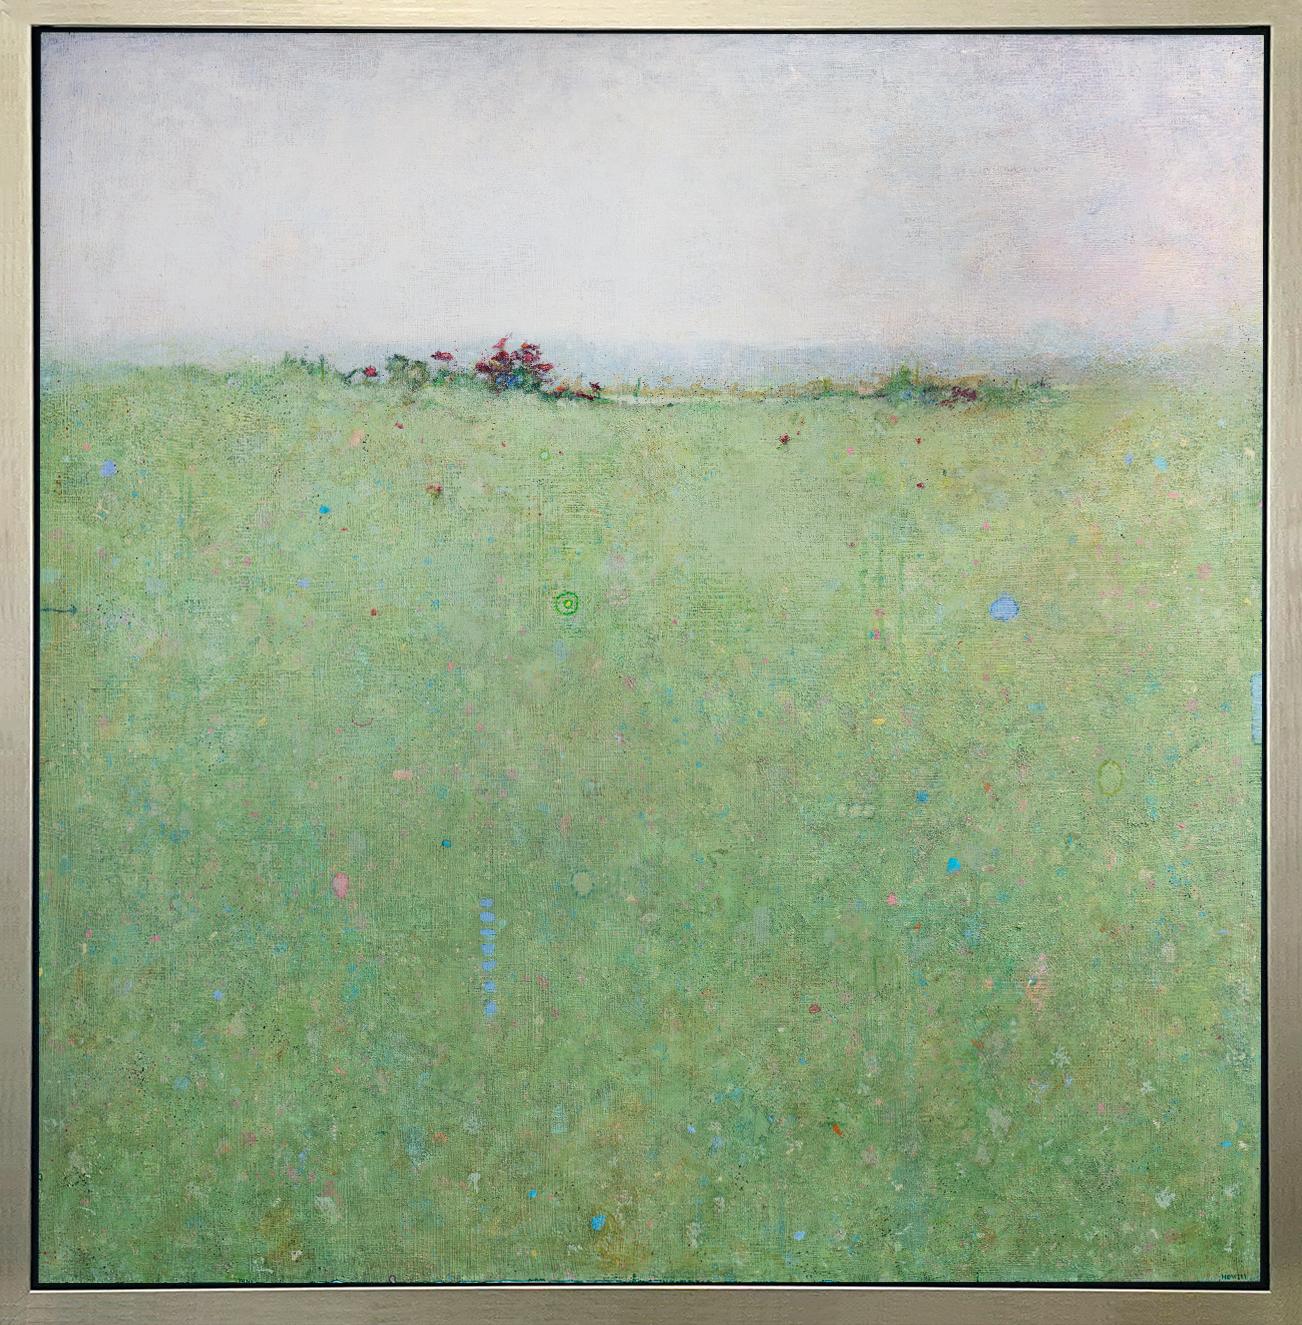 Elwood Howell Abstract Print - "Haze, " Limited Edition Giclee Print, 40 x 40